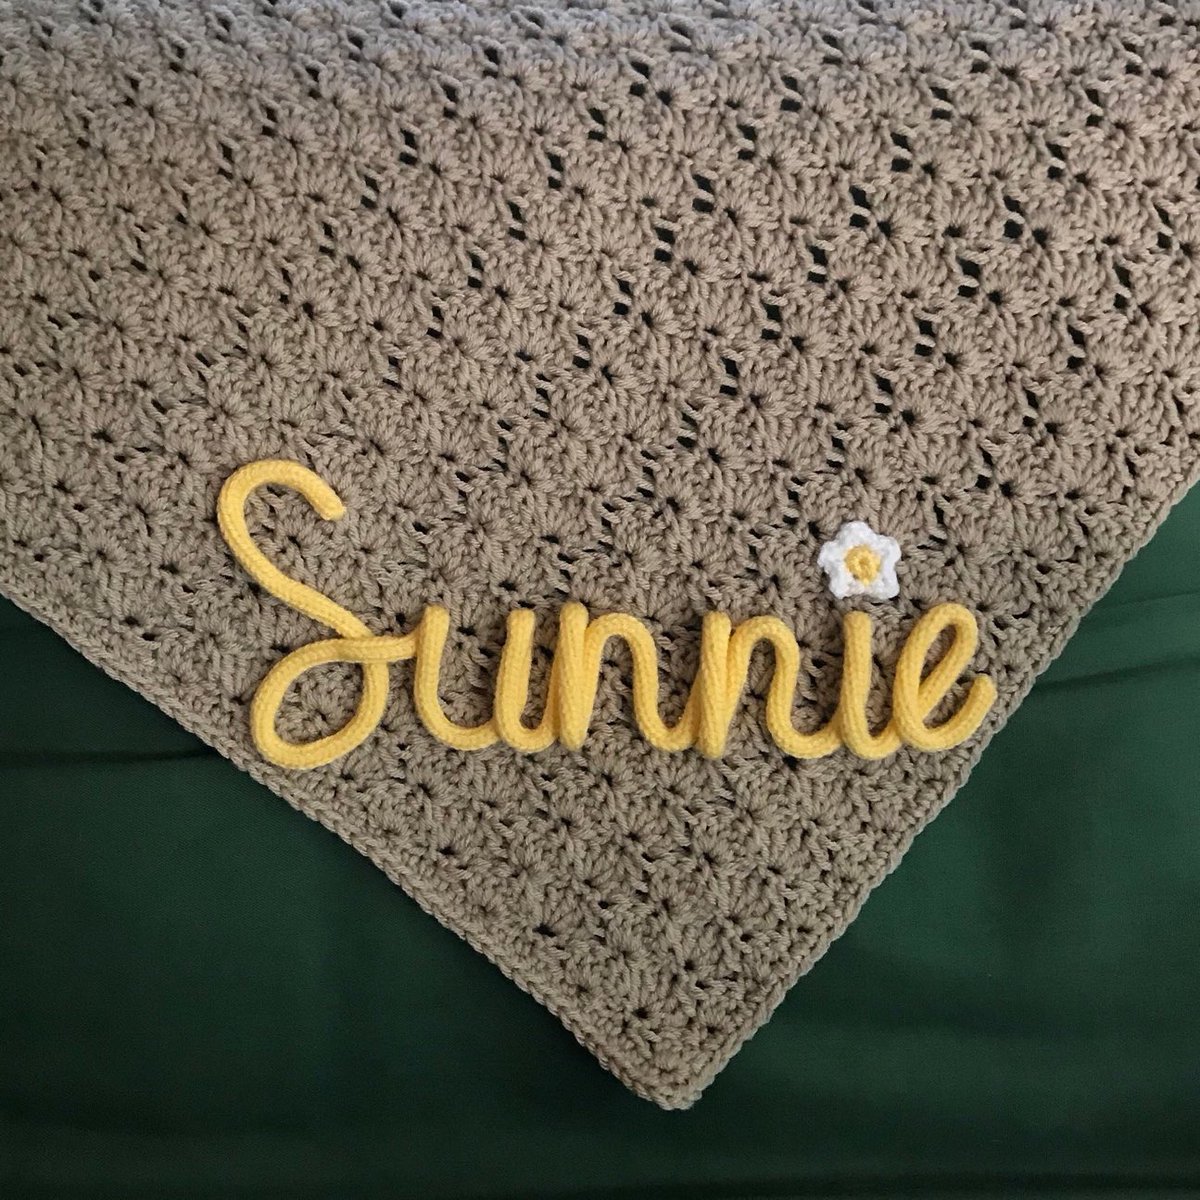 I’m so excited for you to check out my newest listing.  Personalized Baby Blankets, you choose the colors. ❤️

#personalizedbaby #babyshowergift #babygirlgift #babyboygift #handmade #yarnaddict #diversifiedtx #personalized